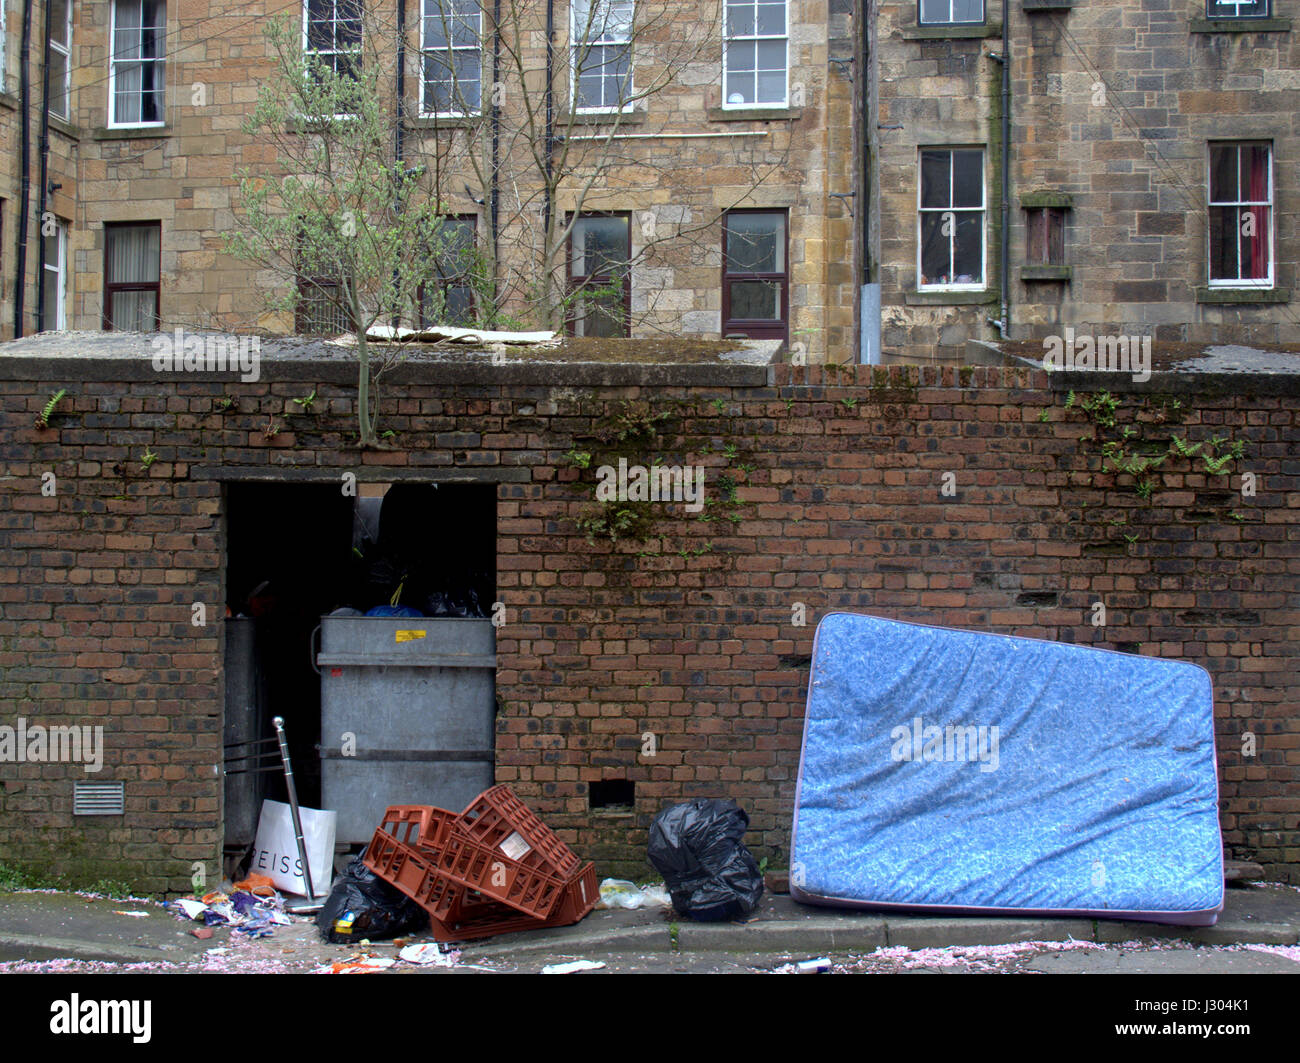 Glasgow park district Fly tipping rubbish garbage rat infested discarded mattress Stock Photo